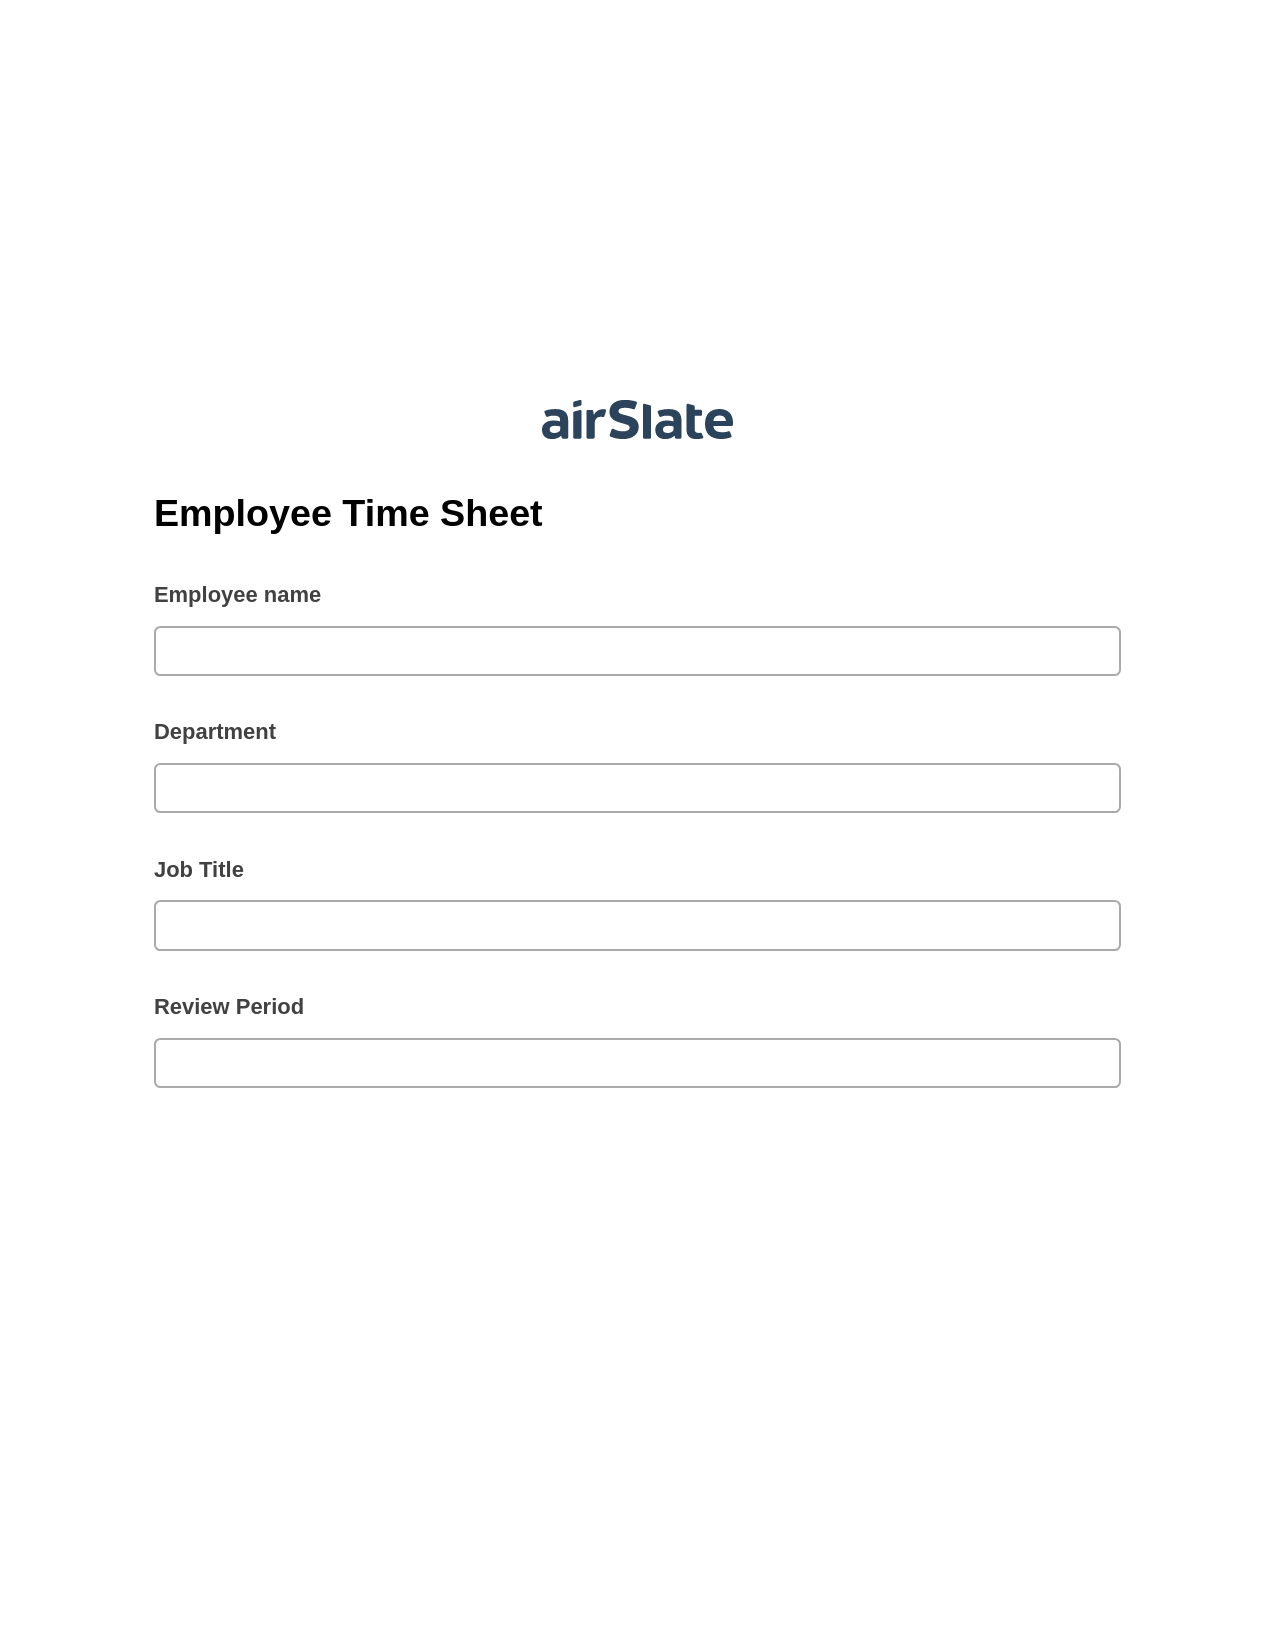 Multirole Employee Time Sheet Pre-fill Dropdowns from Airtable, Update Audit Trail Bot, Webhook Postfinish Bot